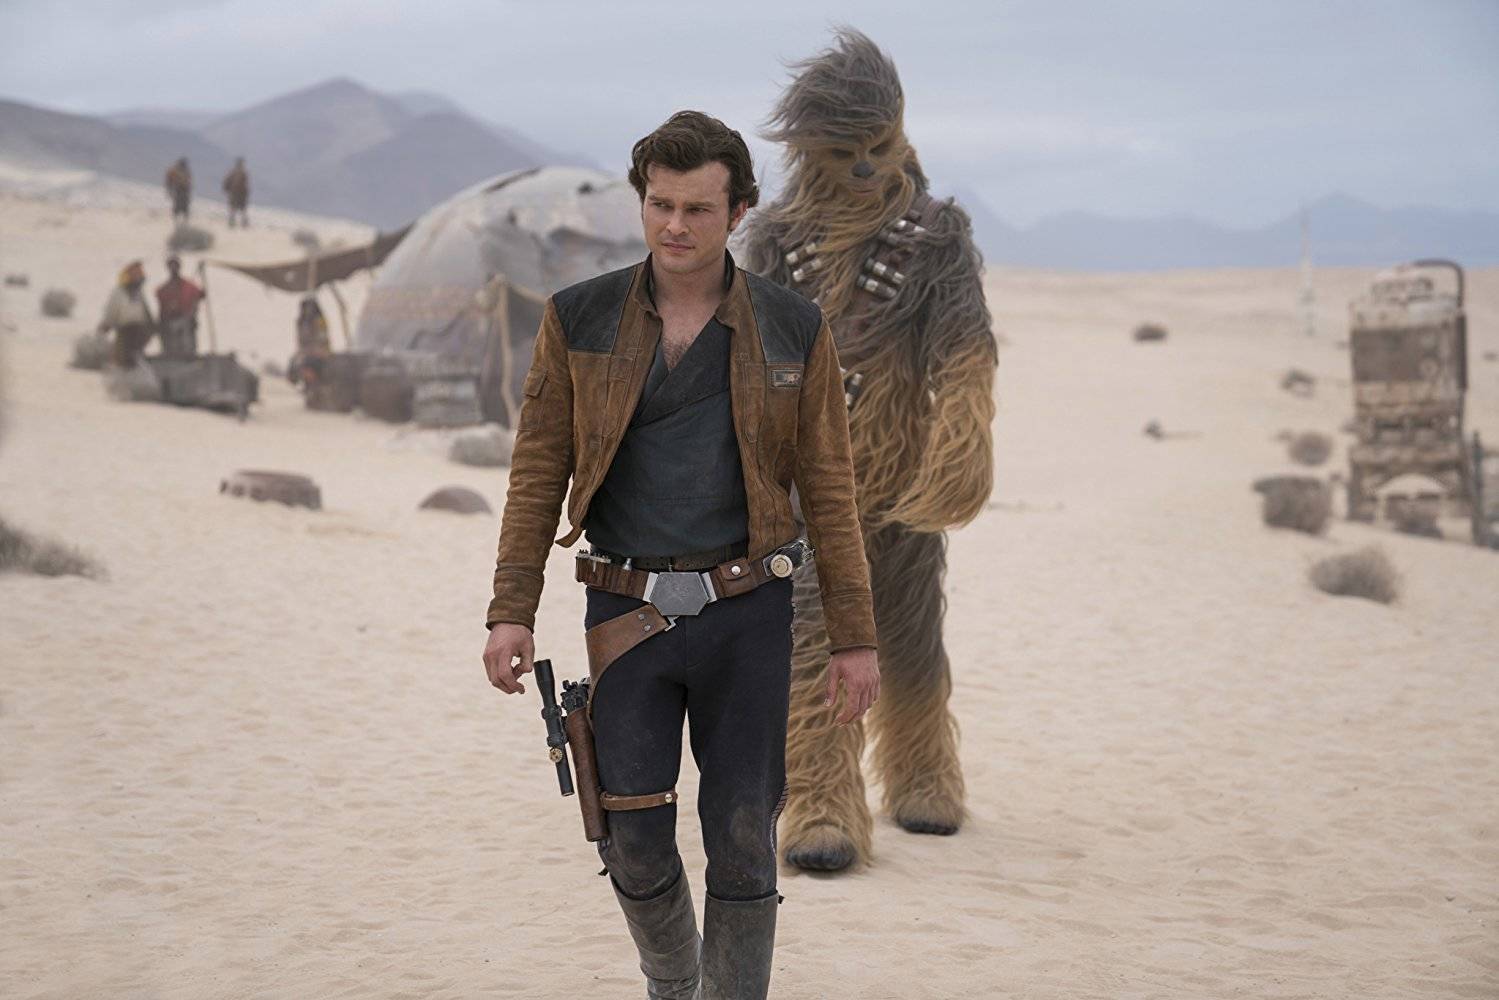 This still released by Disney and Lucasfilm shows Han Solo (Alden Ehrenreich) and Chewbacca (Joonas Suotamo) in “Solo: A Star Wars Story.” (Photo by Jonathan Olley/Lucasfilm Ltd.)